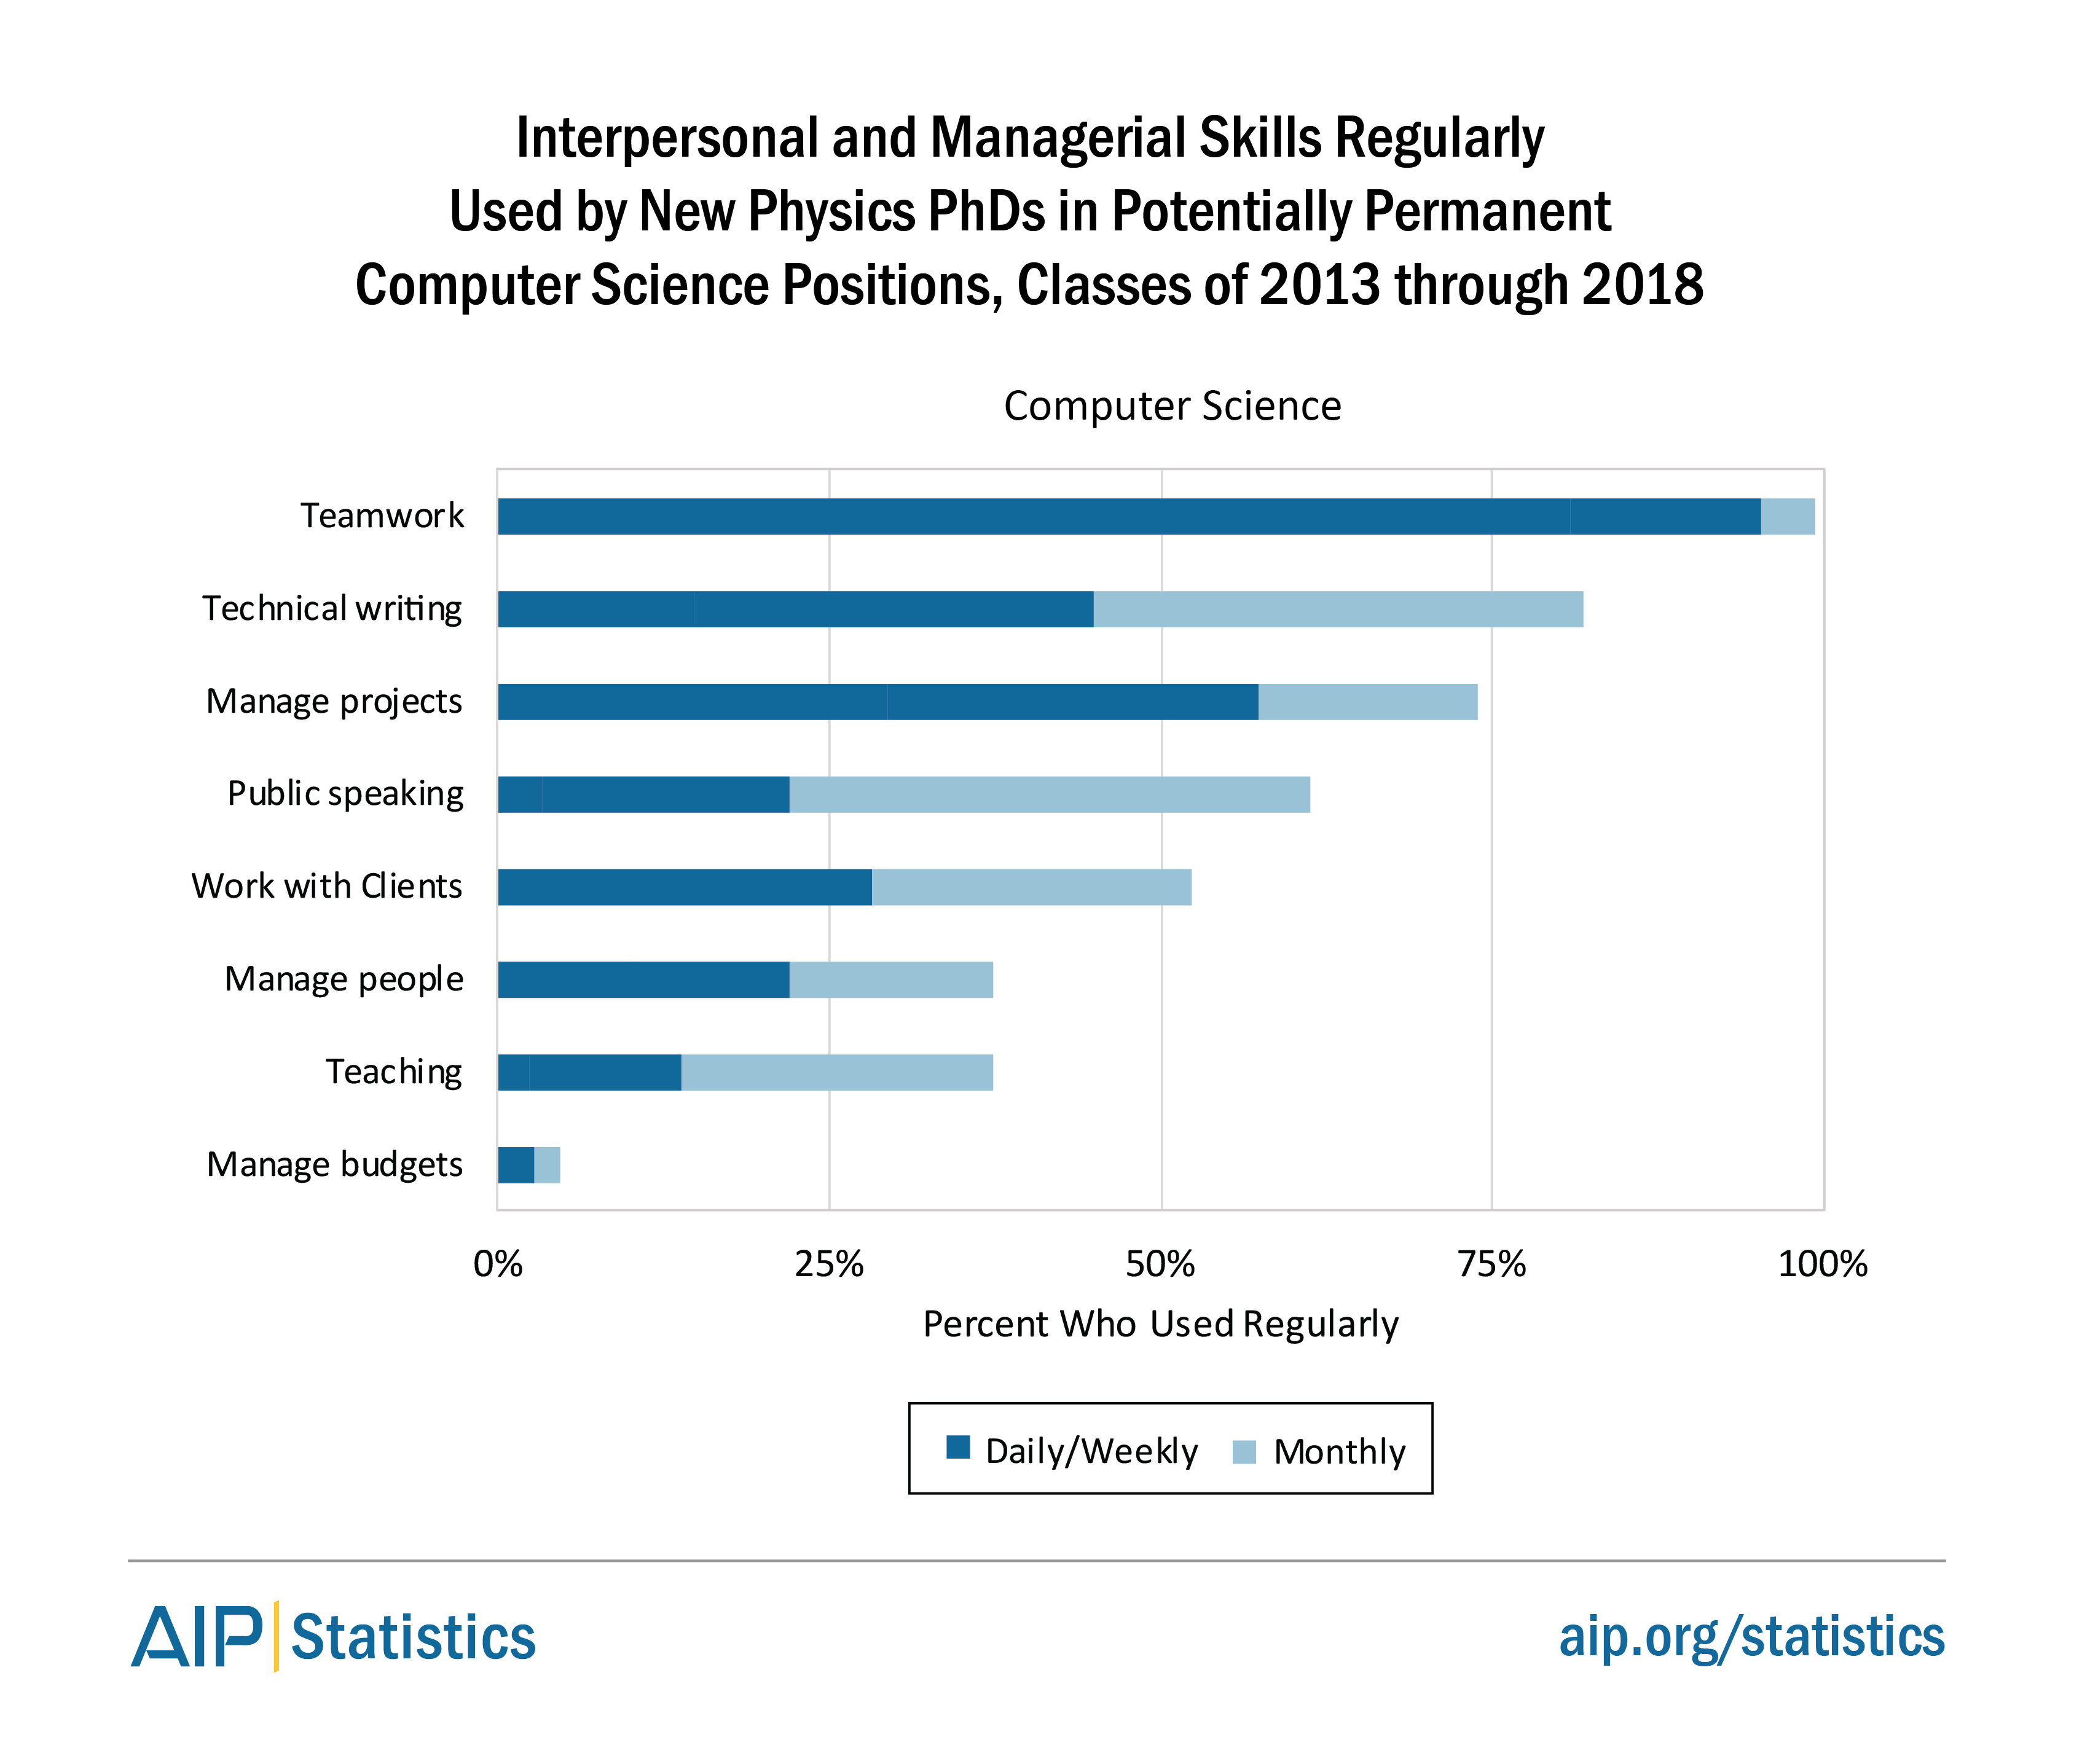 Interpersonal and Managerial Skills Used by Physics PhDs in Computer Software Positions